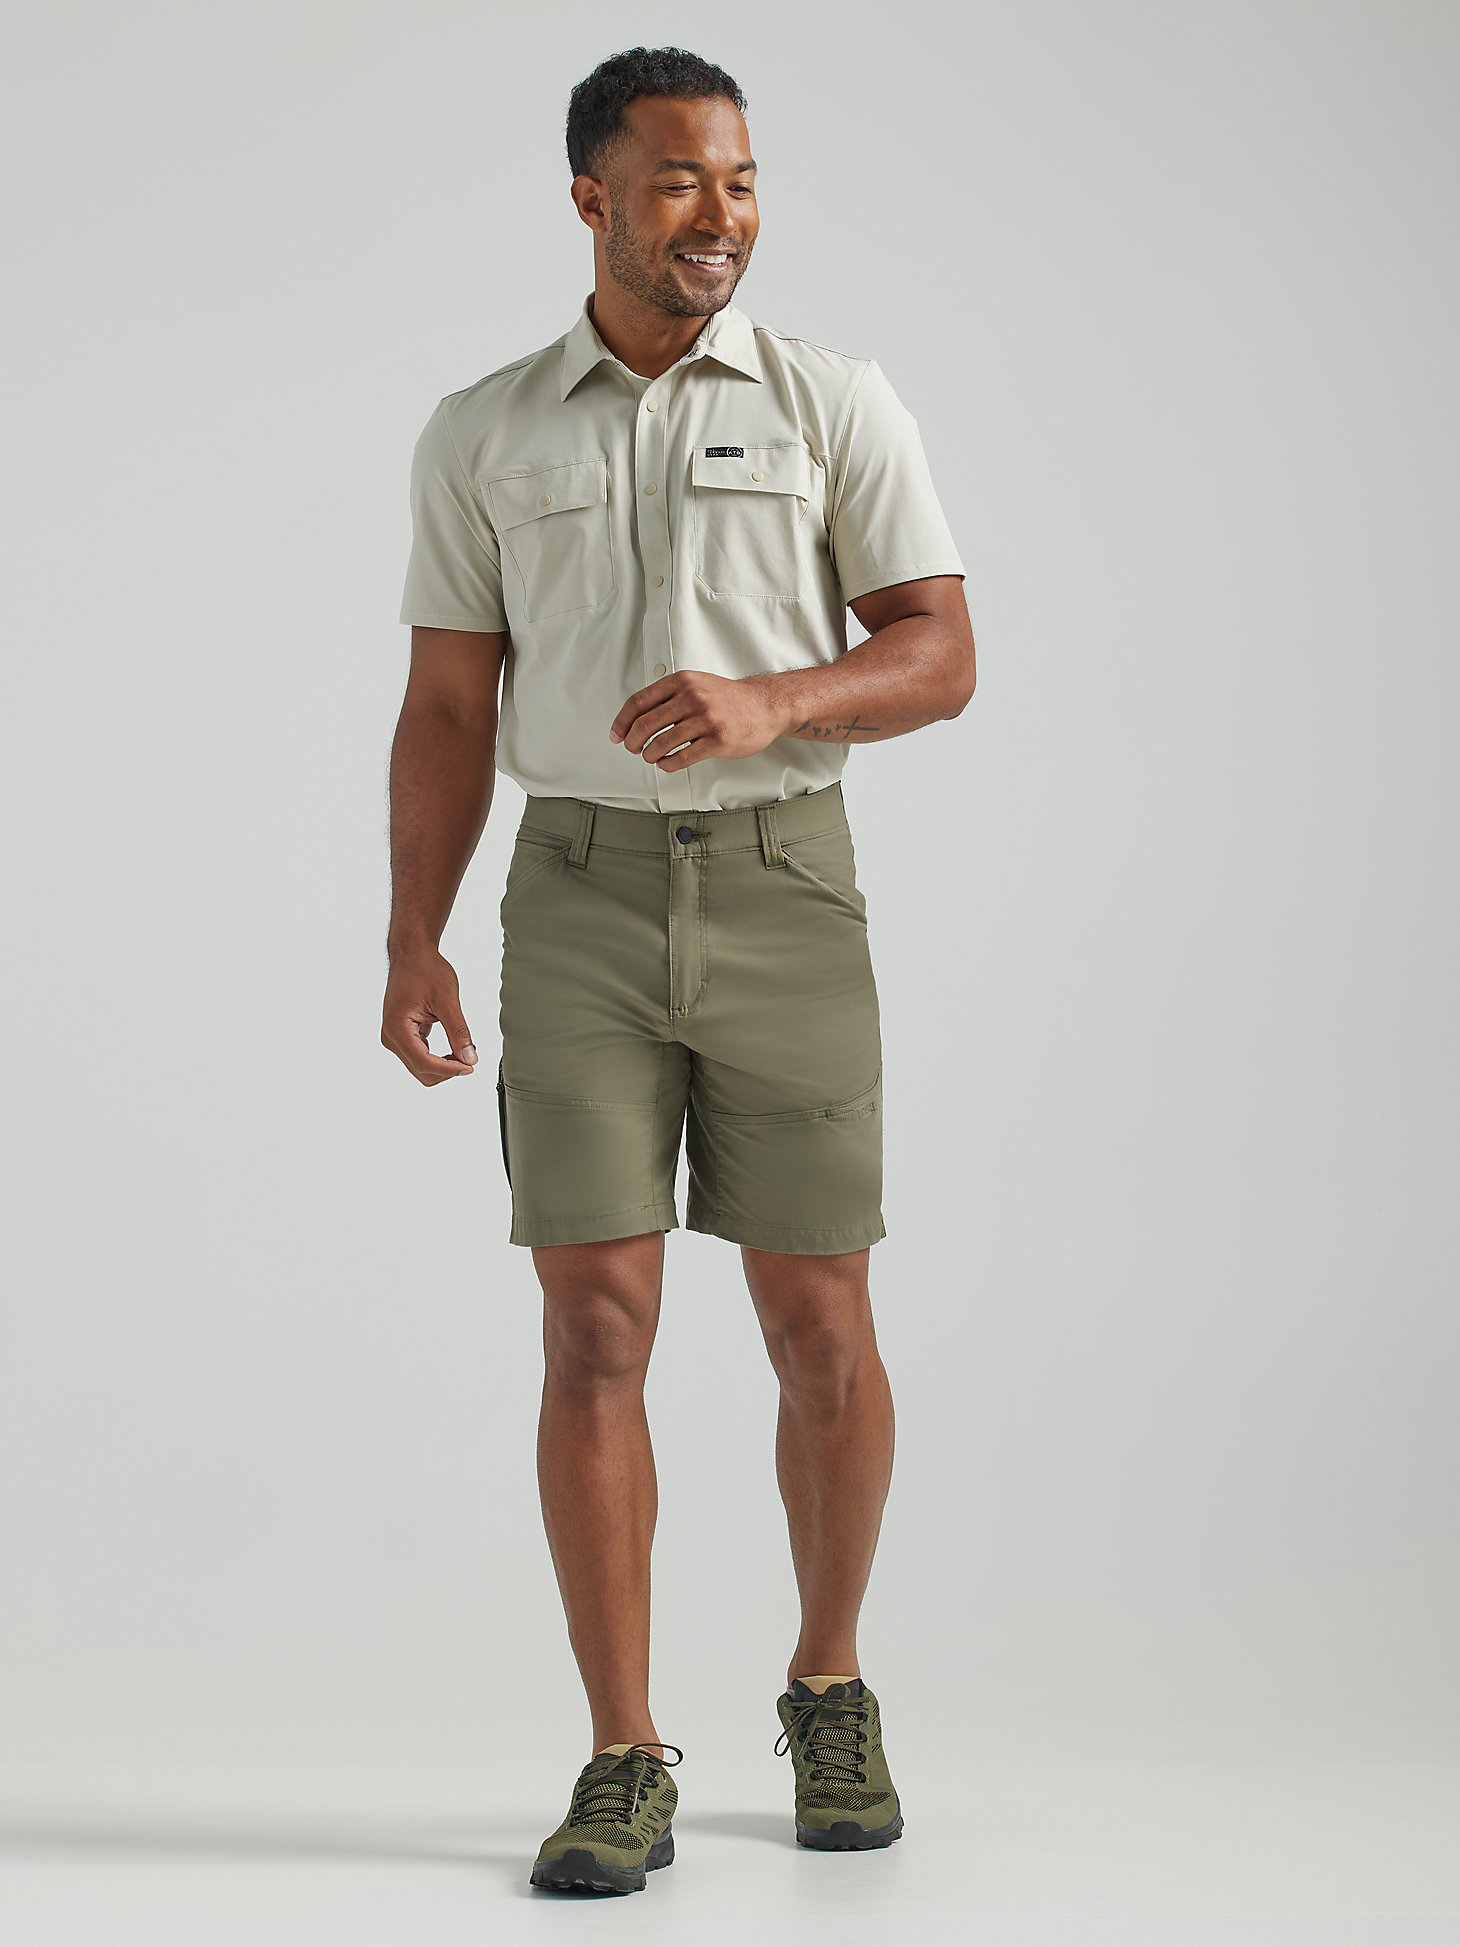 Rugged Trail Short in Dusty Olive alternative view 1